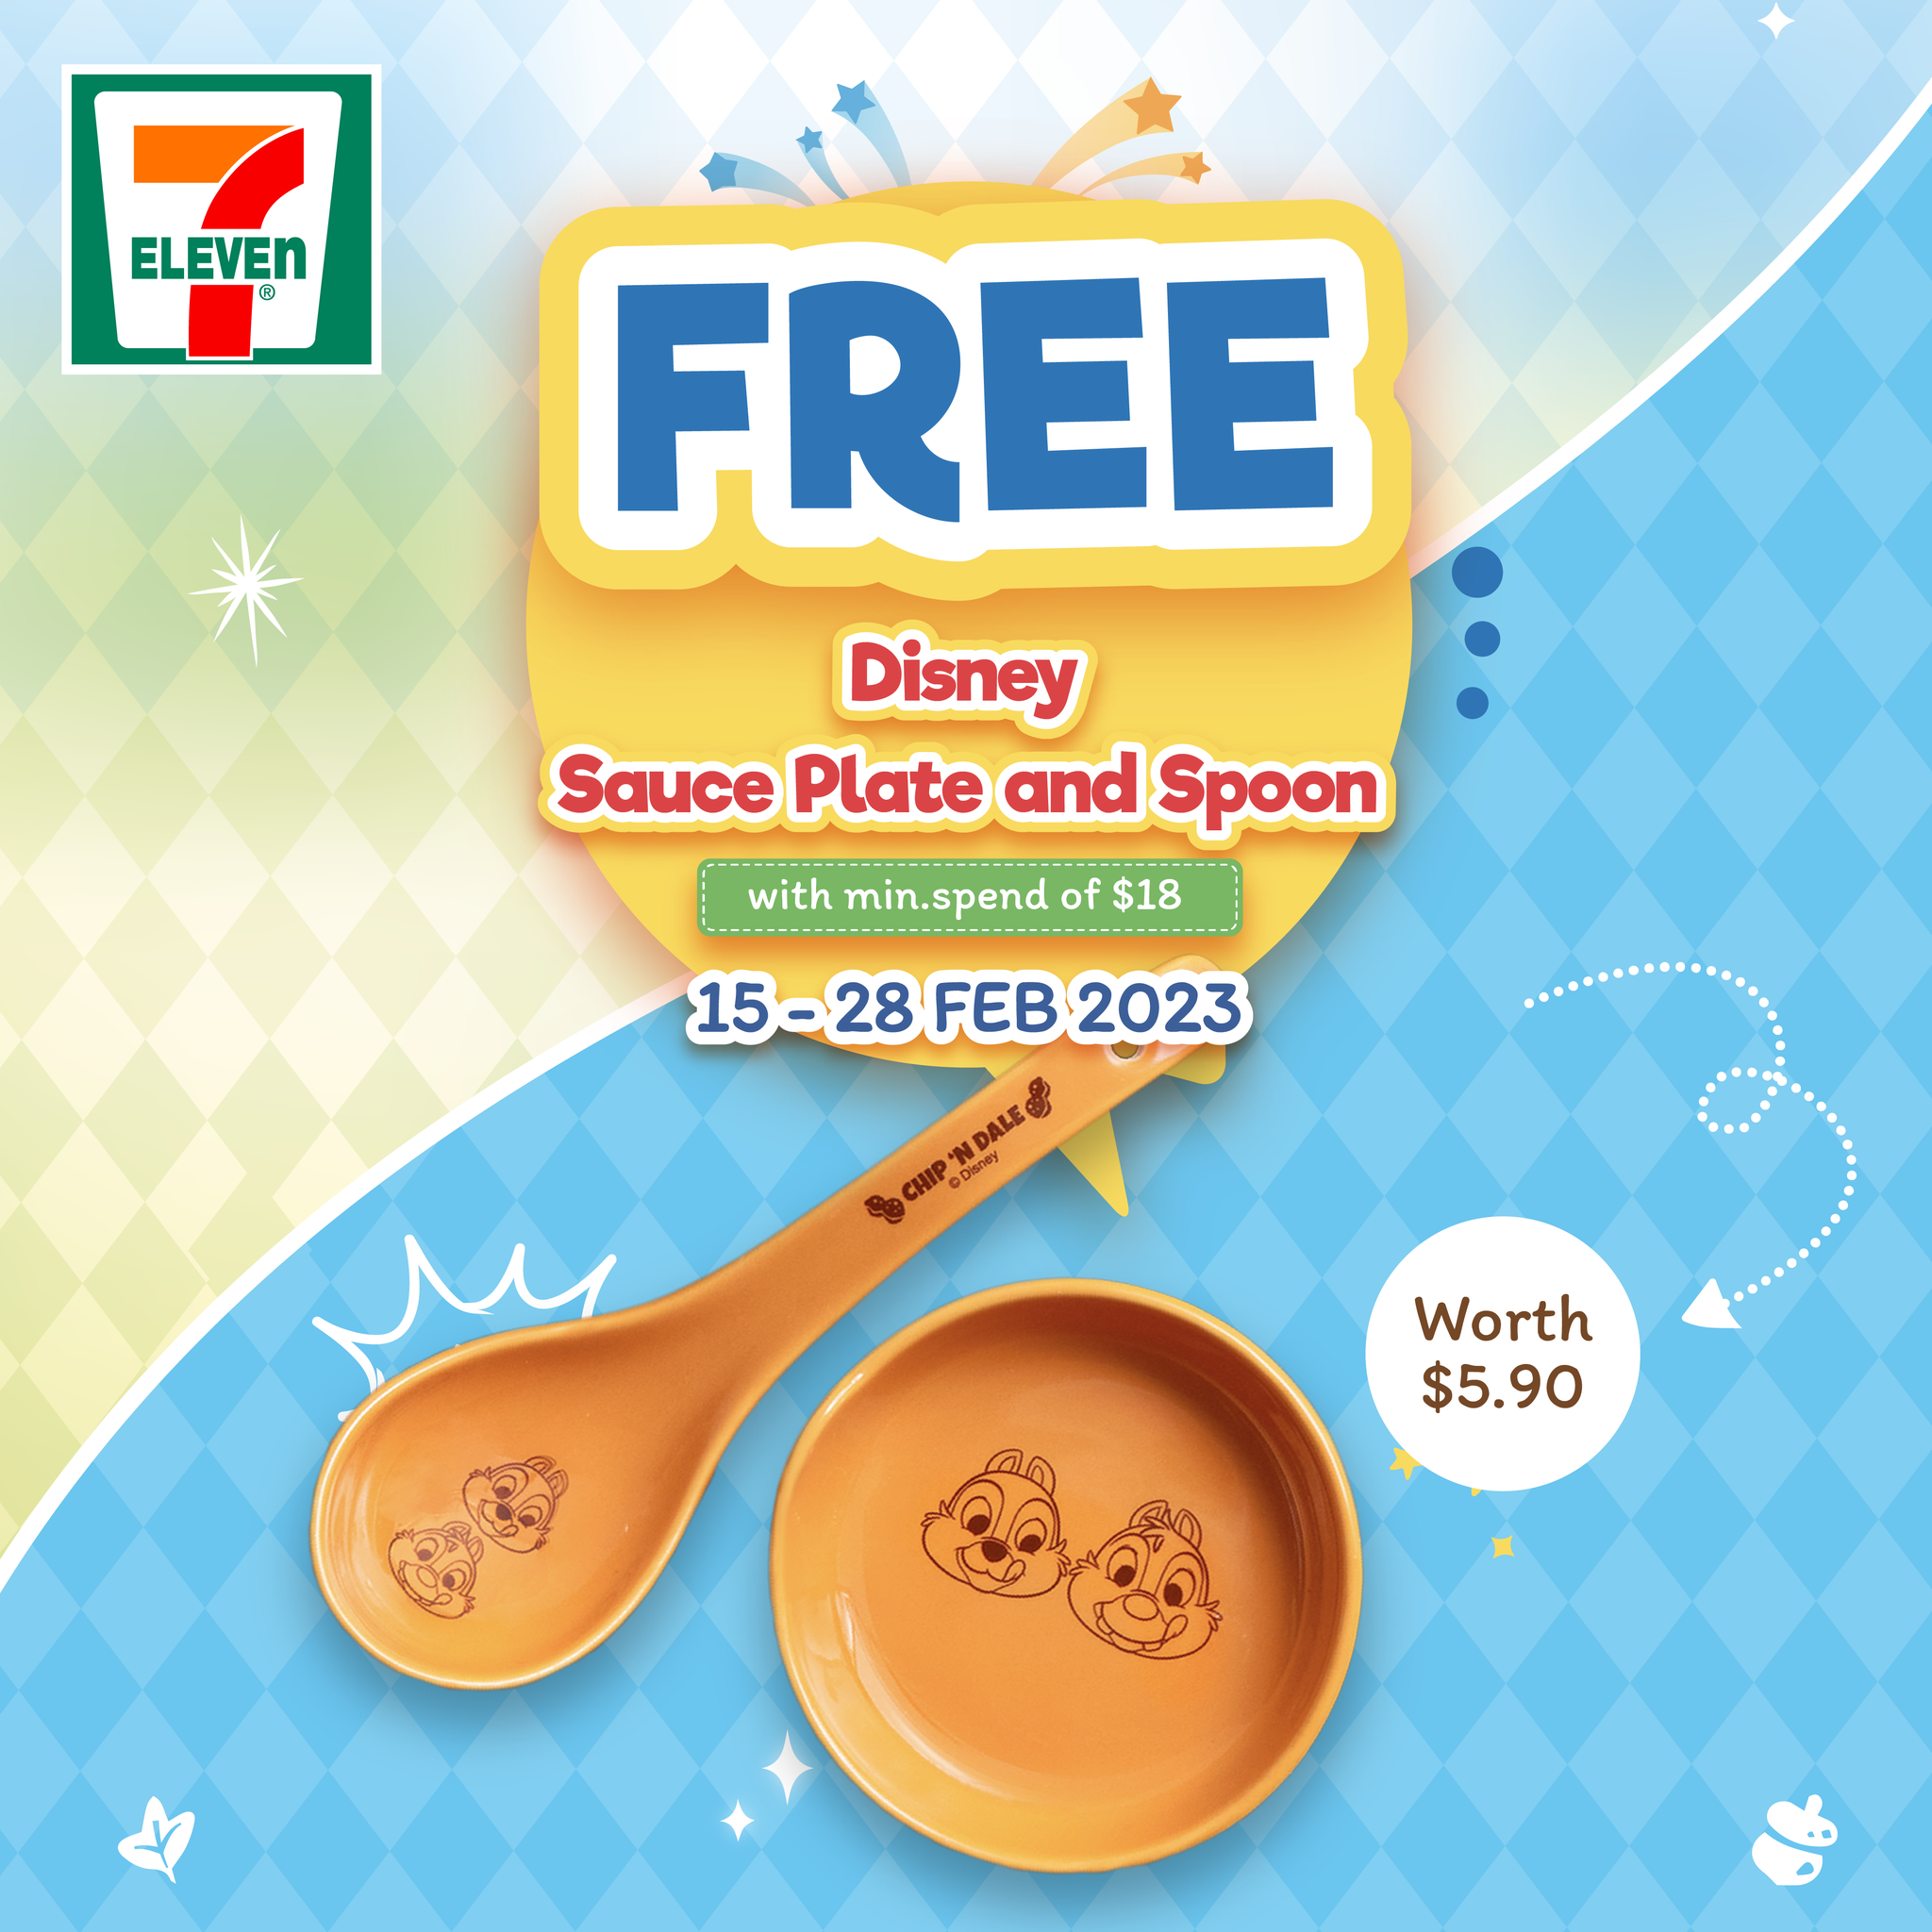 Lobang: 7-Eleven is giving away a free Disney Sauce Plate and Spoon worth $5.90 with min. spend from now till 28 Feb - 3